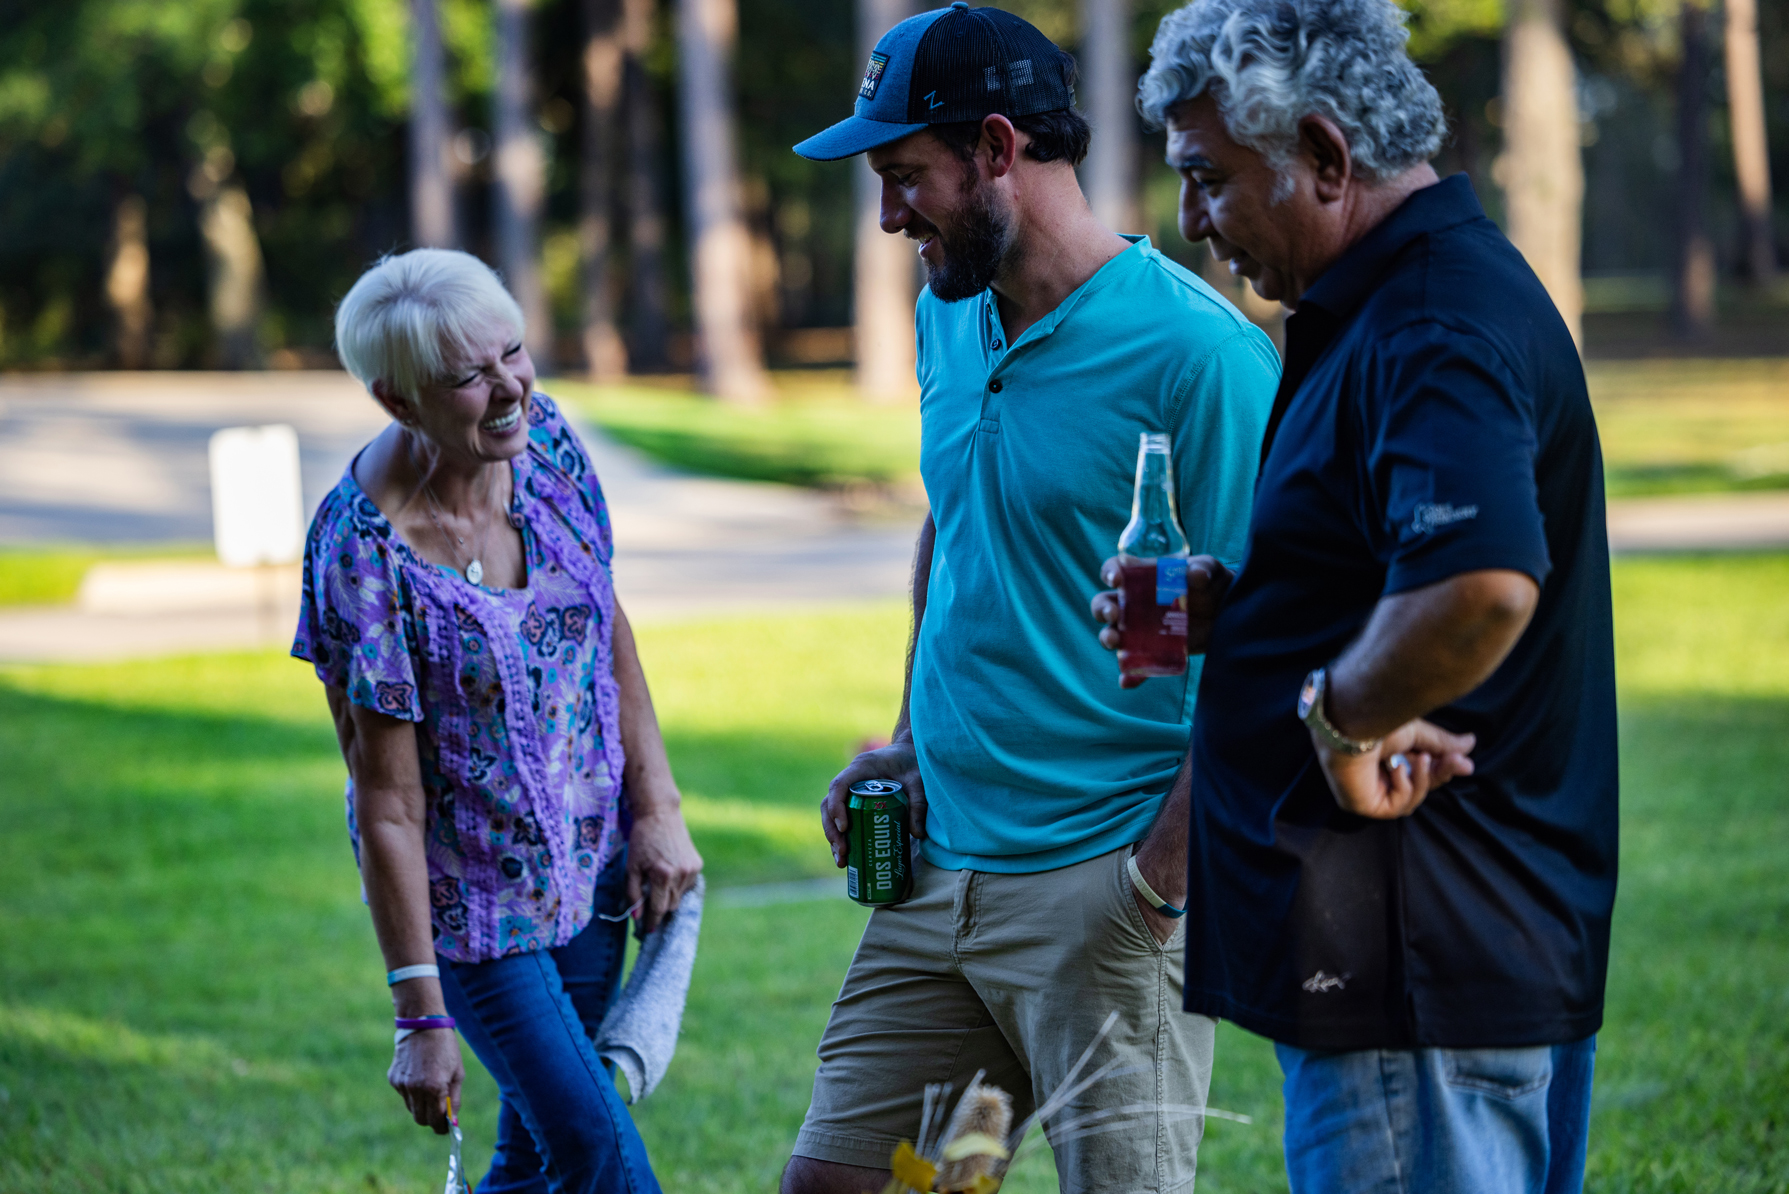 Debbie Chapa, Josh St. John, and Jaime Chapa share a beer during a family visit to the Magnolia cemetery where Walt Klein and his daughter, Rebecca, are buried. Walt died in 2018 following a heart attack in the Harris County Jail. Rebecca died three years later of cervical cancer.